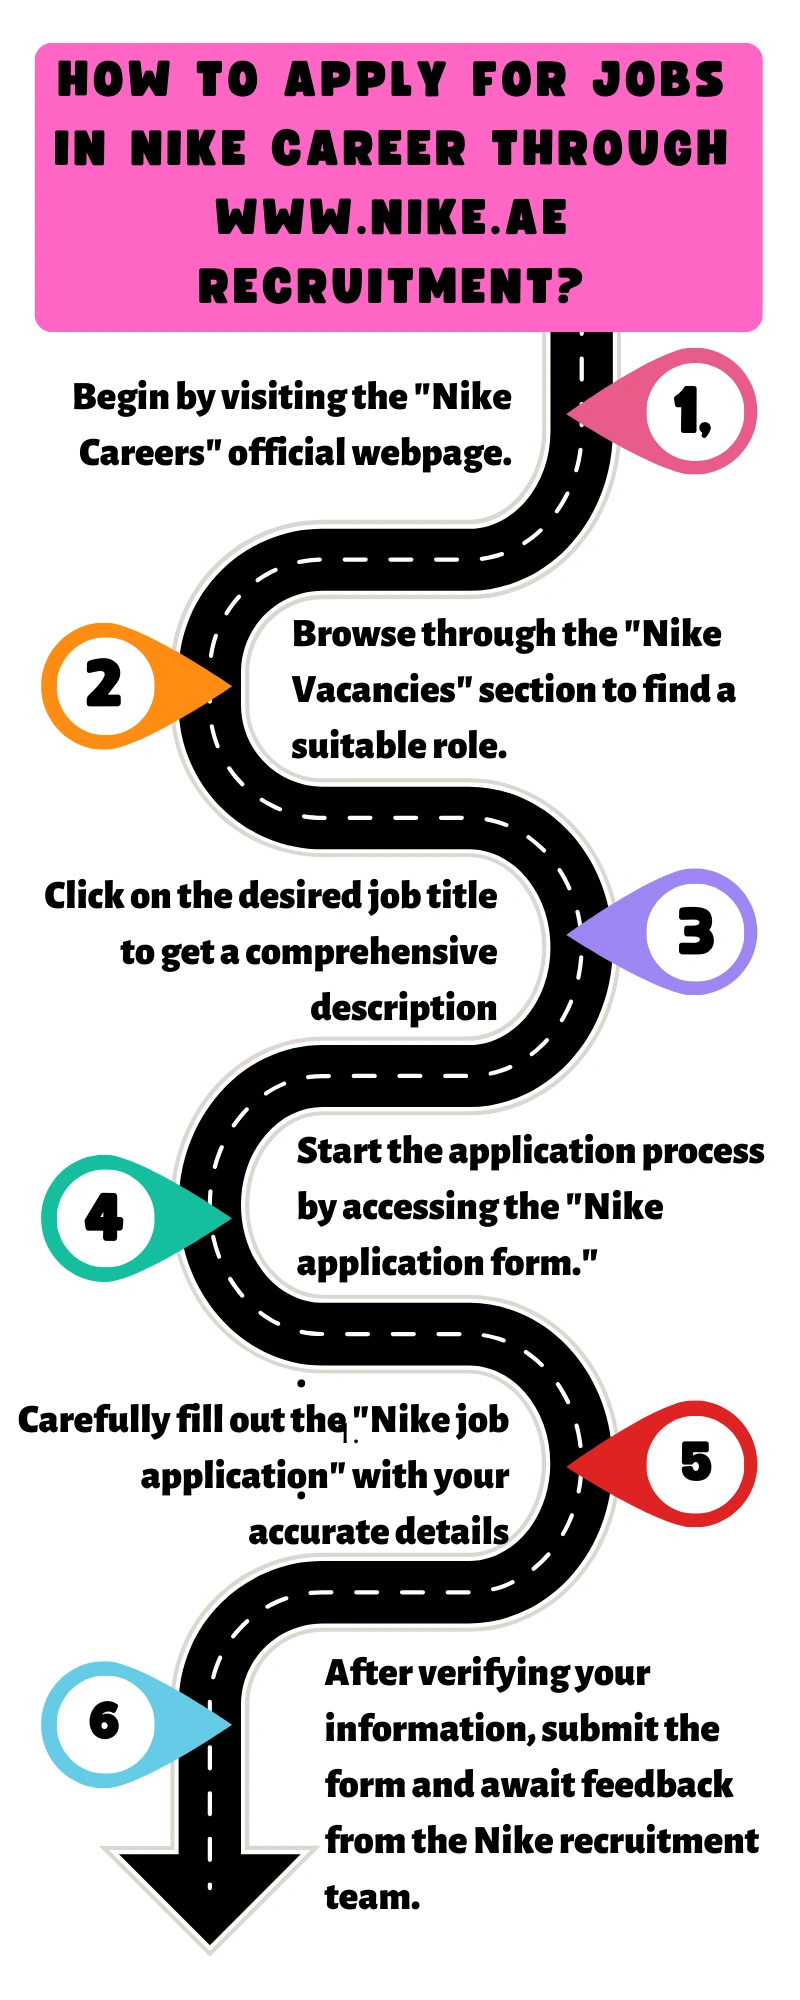 How to Apply for Jobs in Nike Career through www.nike.ae recruitment?